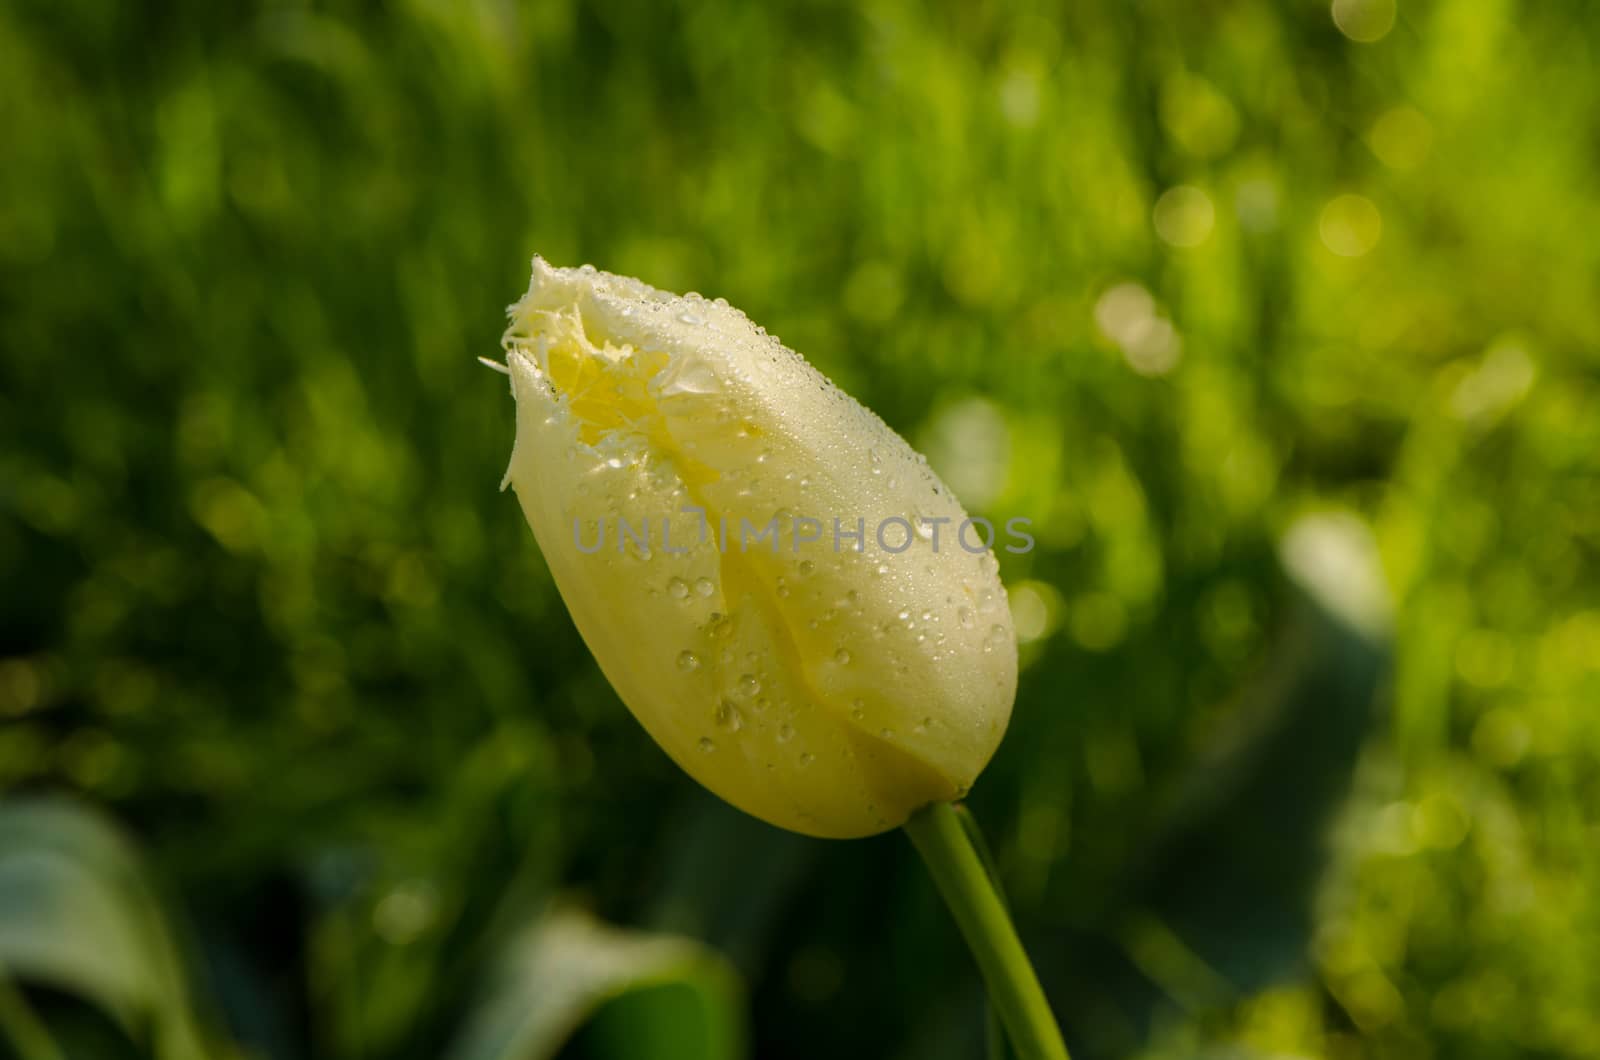 Early morning dew water drops on yellow decorative tulip flower bud bloom in spring garden. Birds sing.